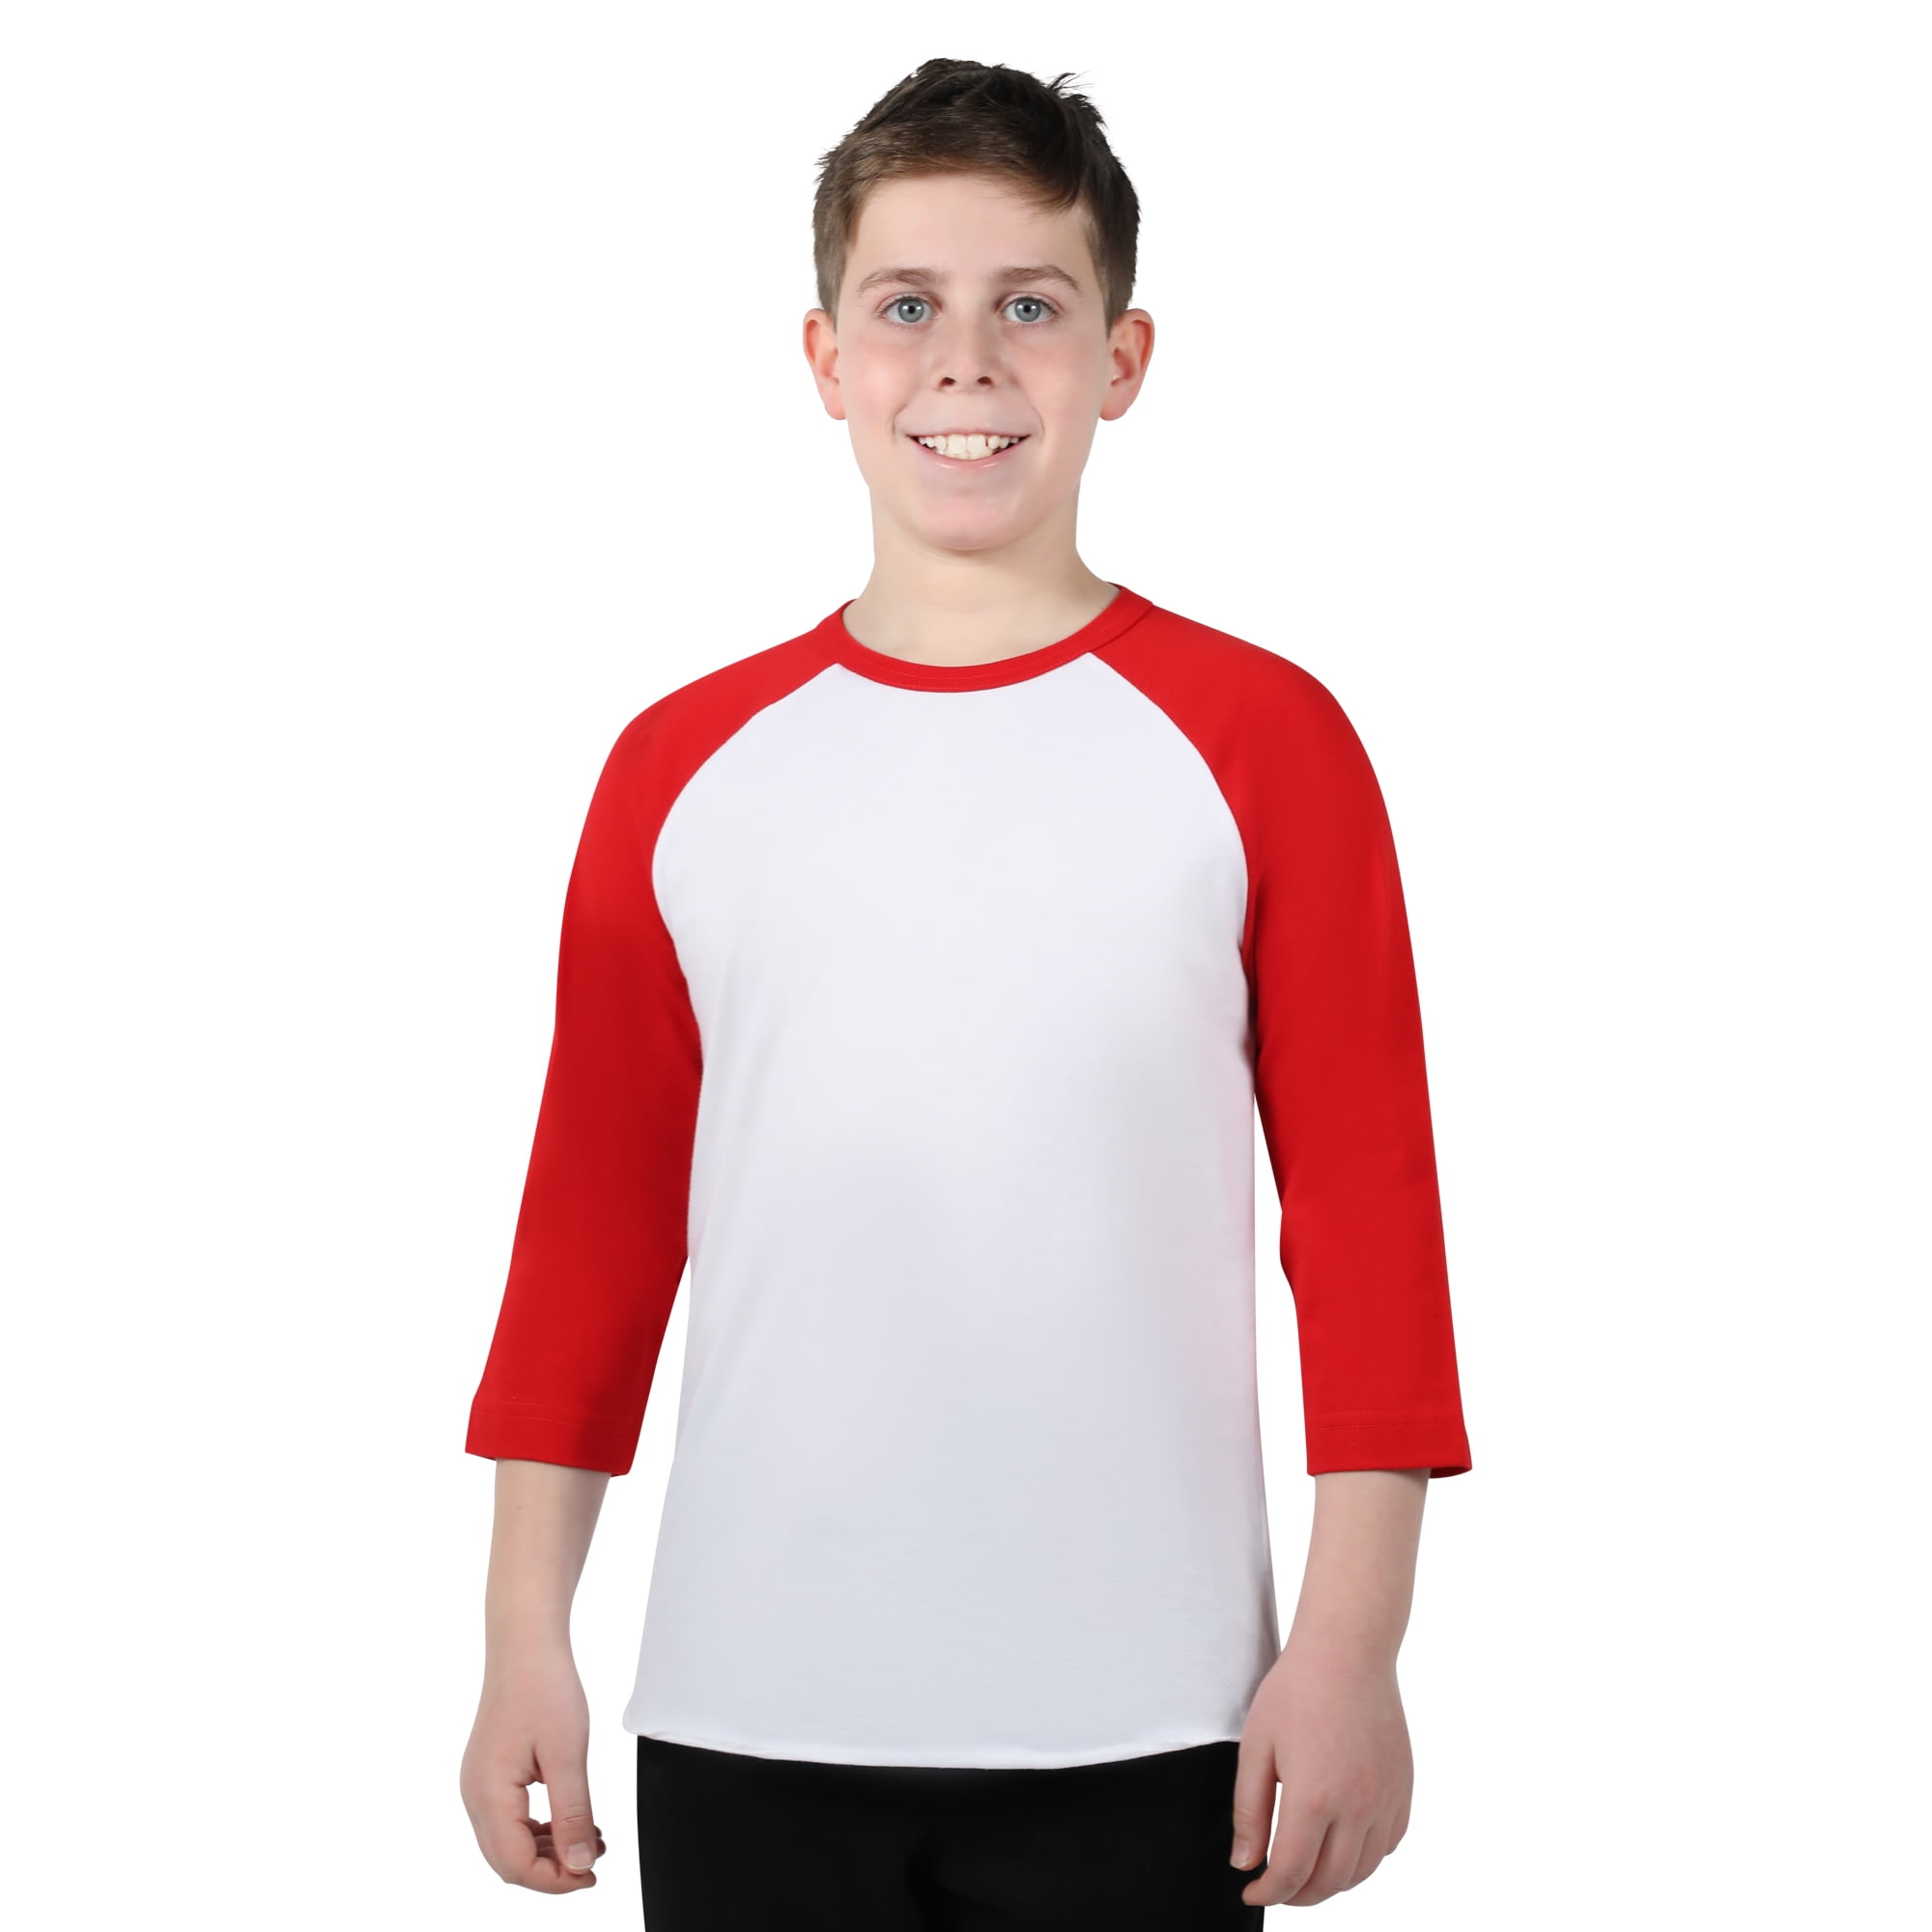 Athletic Works Youth 3/4 Sleeve Raglan Baseball Tee, Red, Size Large